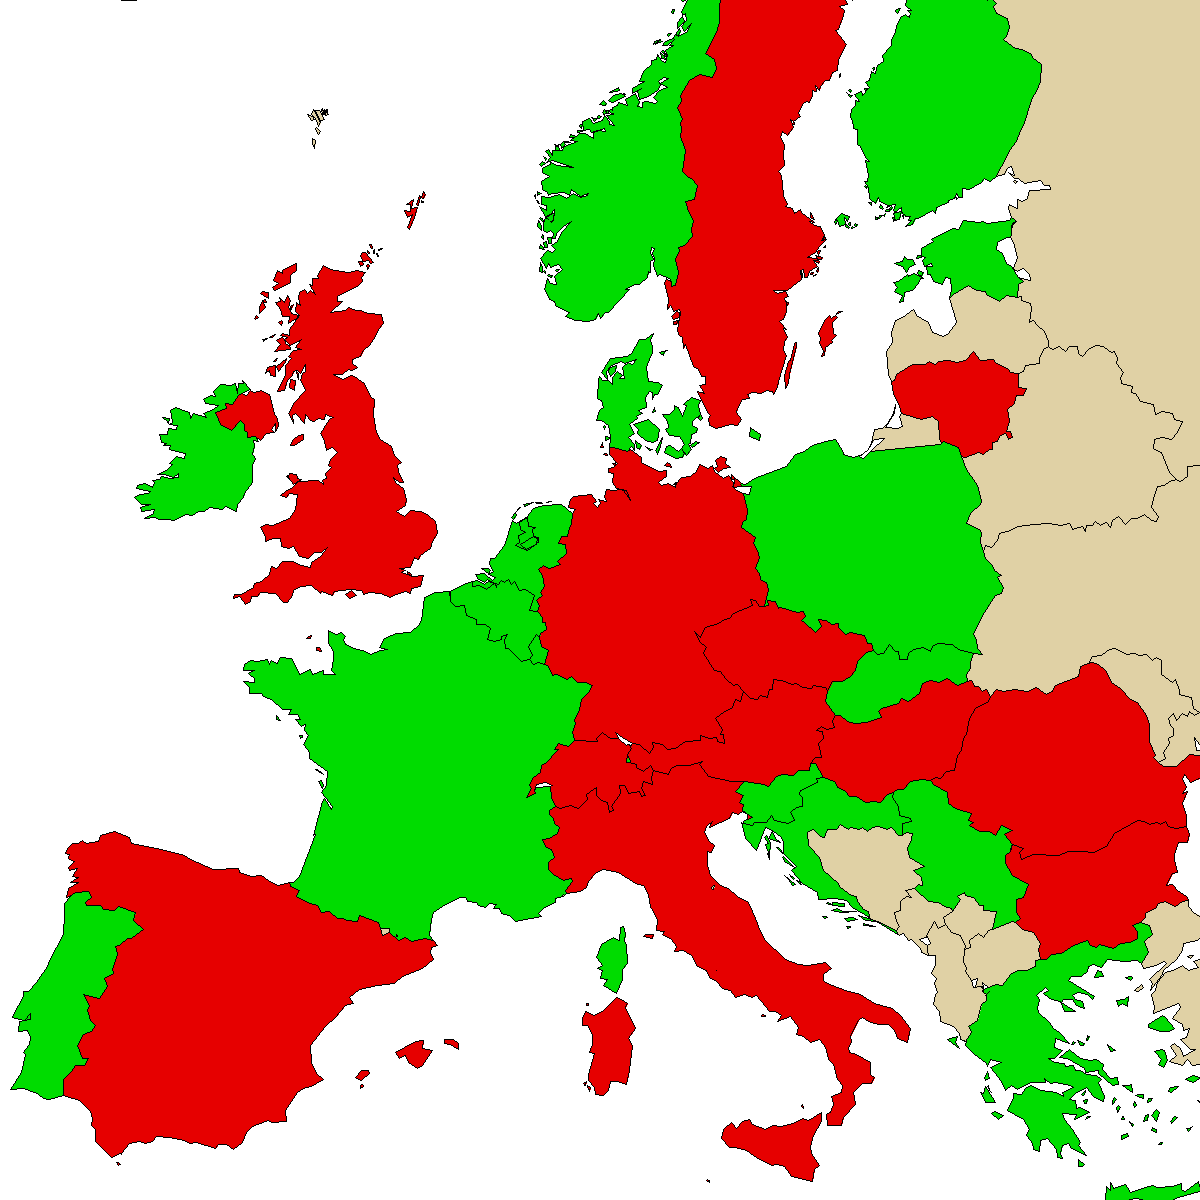 legal info map for our product 2FDCK, green are countries with no ban, red with ban, grey is unknown